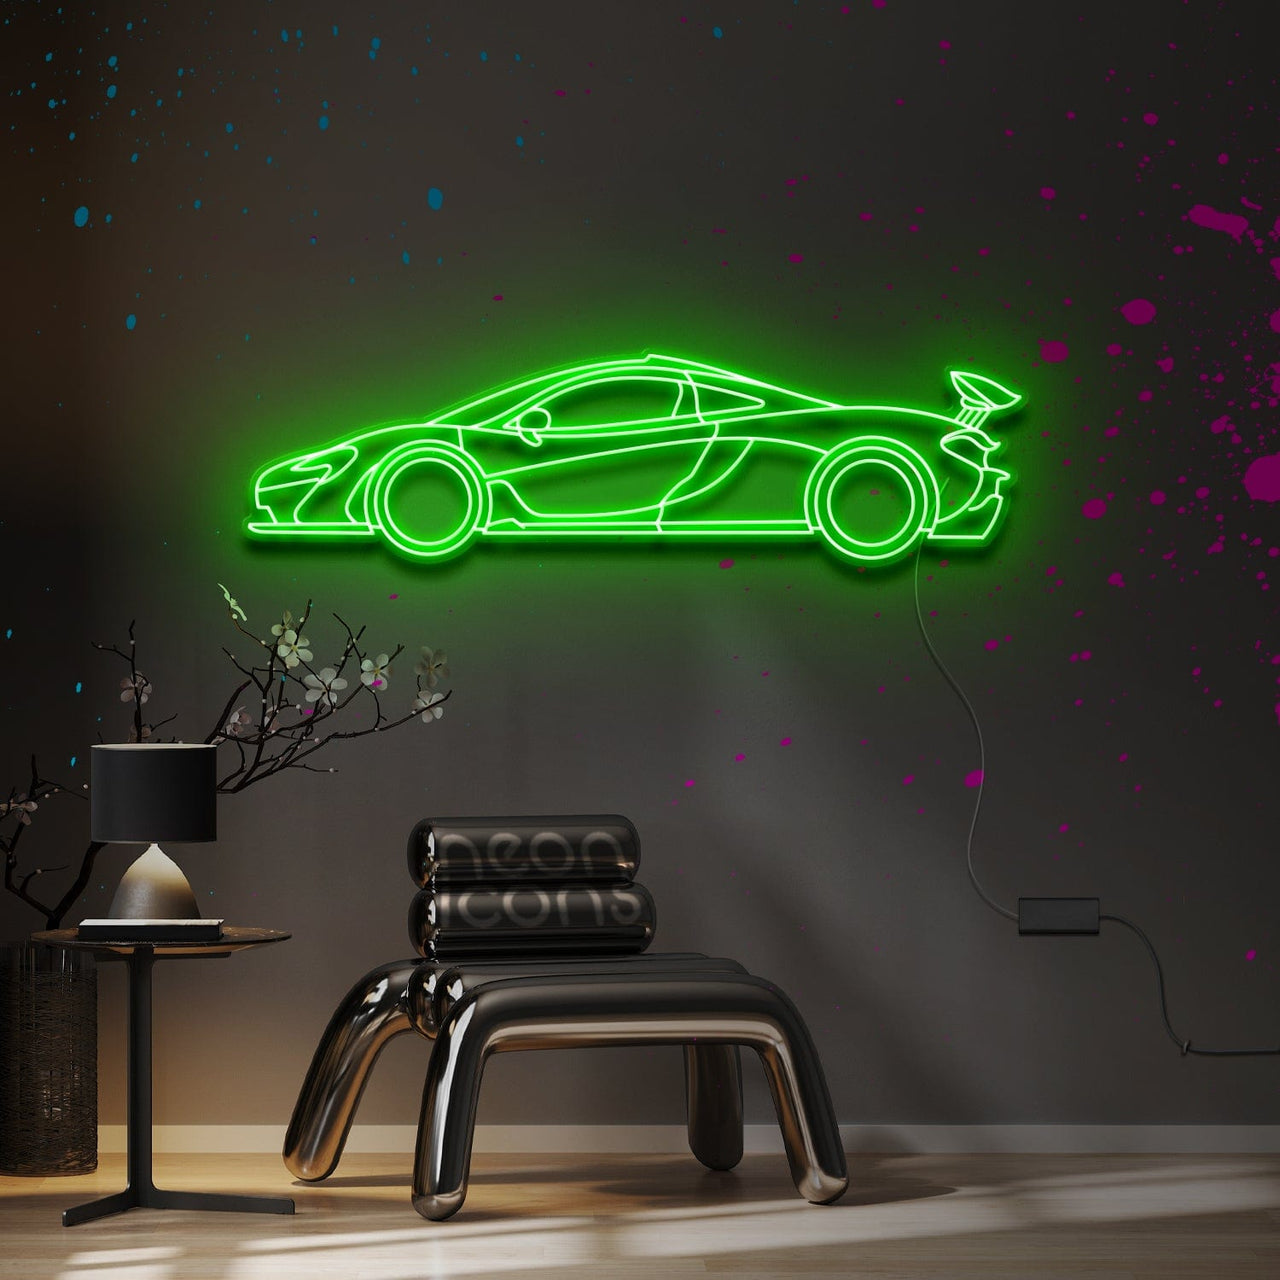 "McLaren P1" Neon Sign 4ft x 1.2ft / Green / LED Neon by Neon Icons